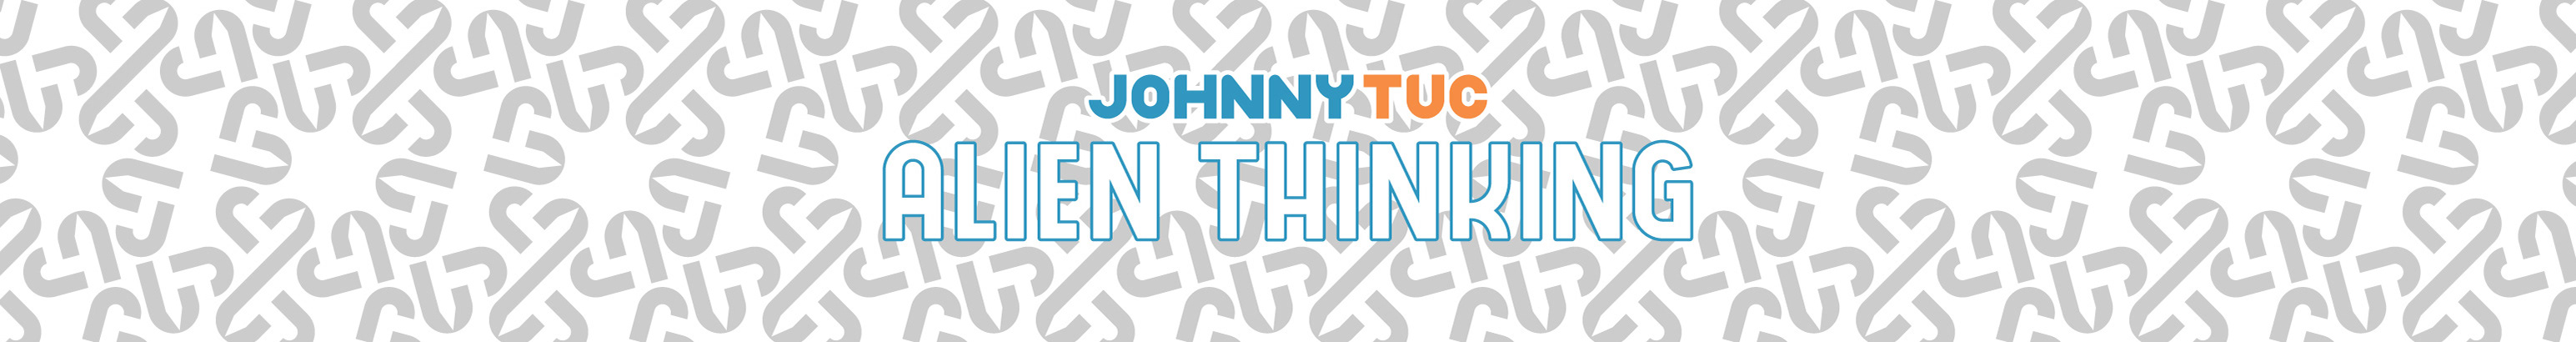 Johnny Tuc's profile banner